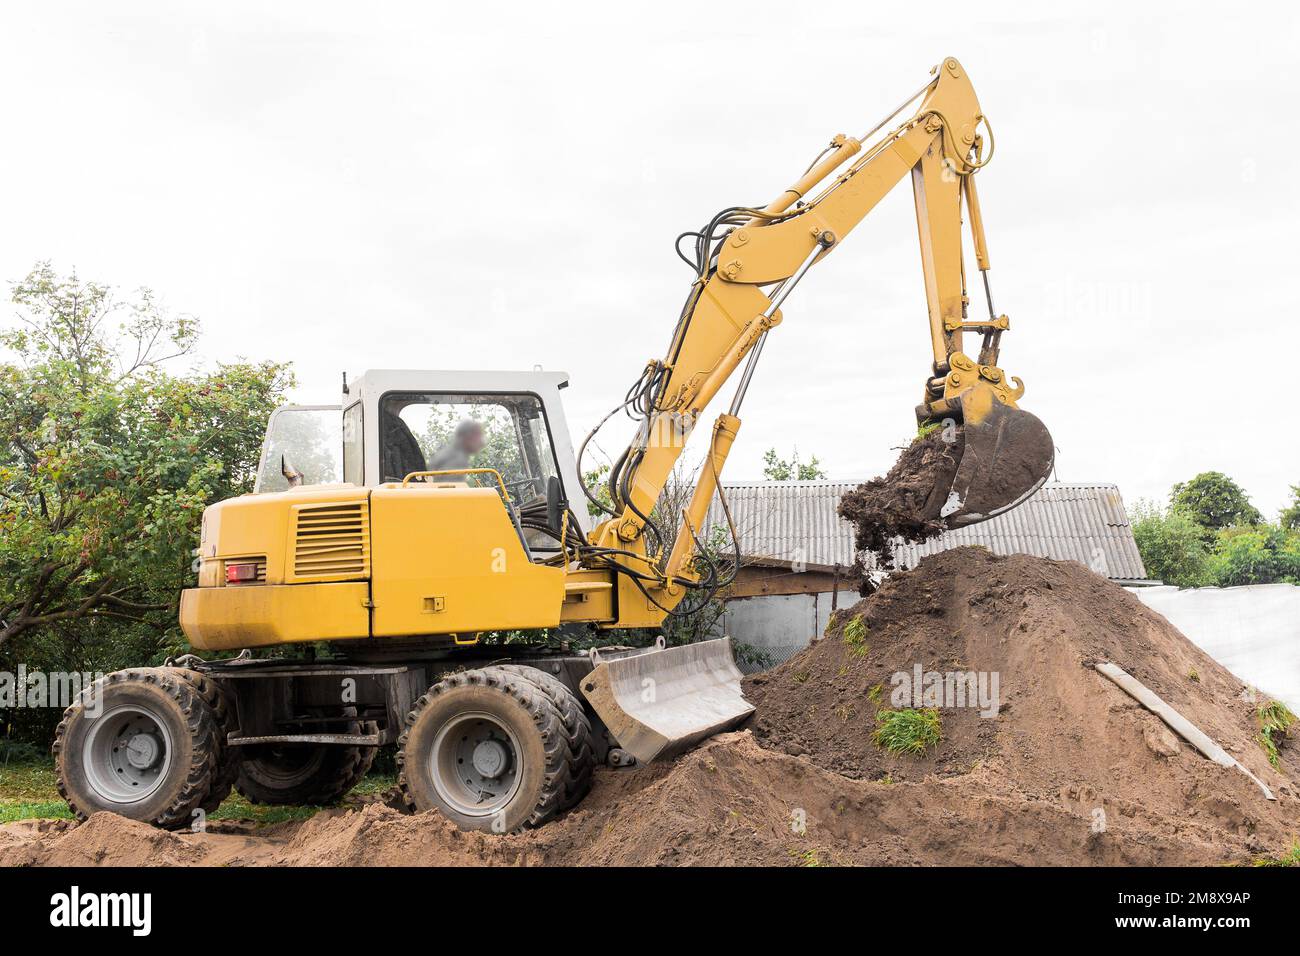 A excavator is digging on outdoors in an industrial site. Excavation works. Stock Photo